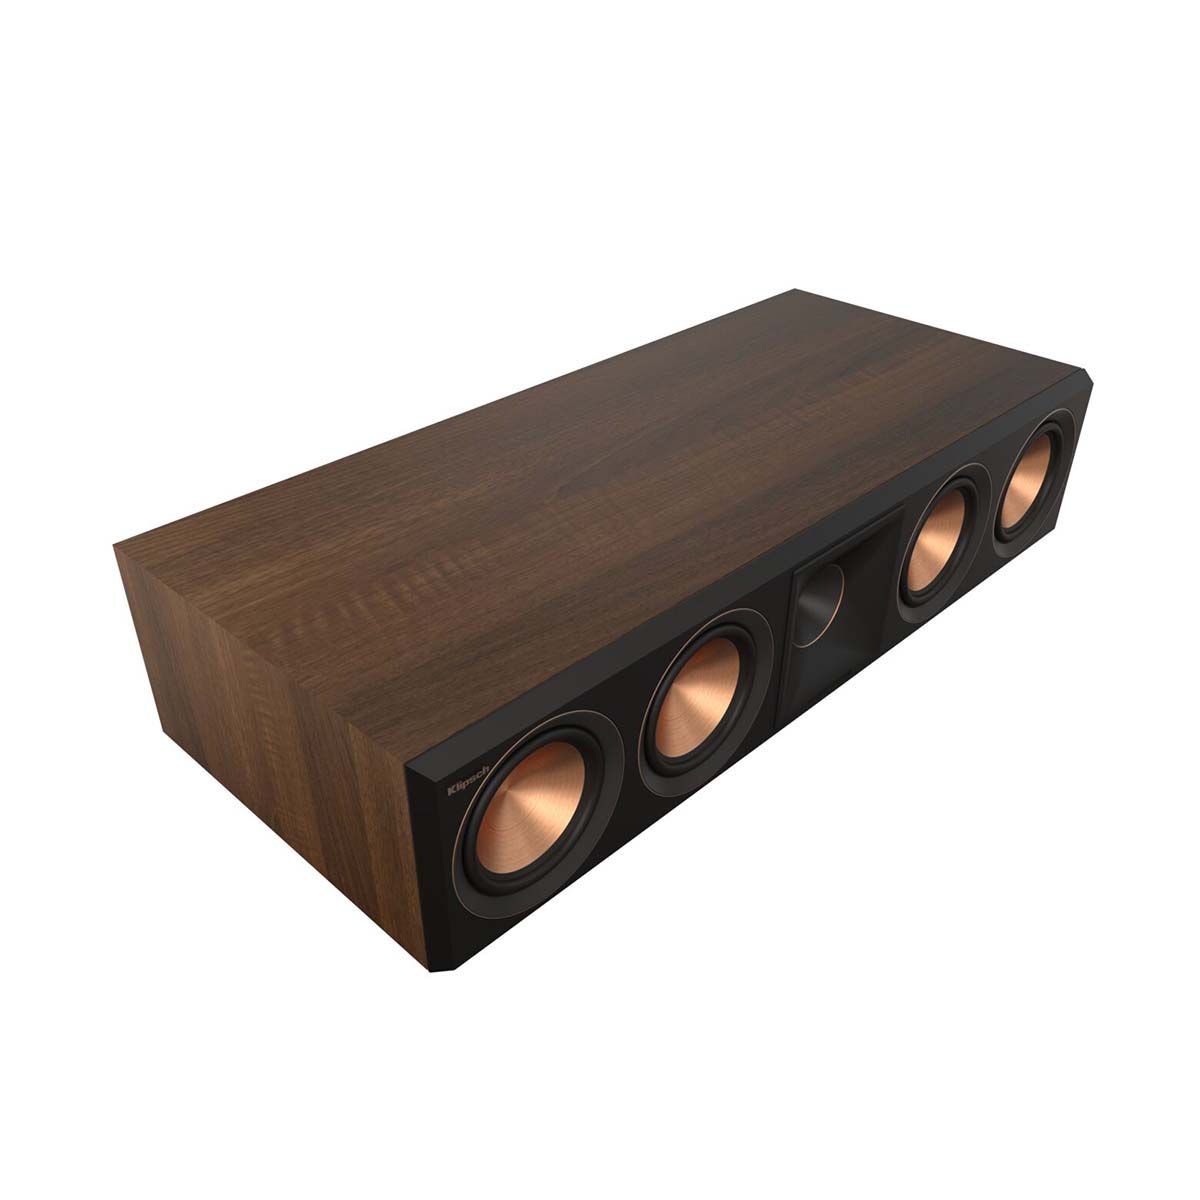 Klipsch RP-504C II Center Channel Speaker - Walnut - top angled front view without grill